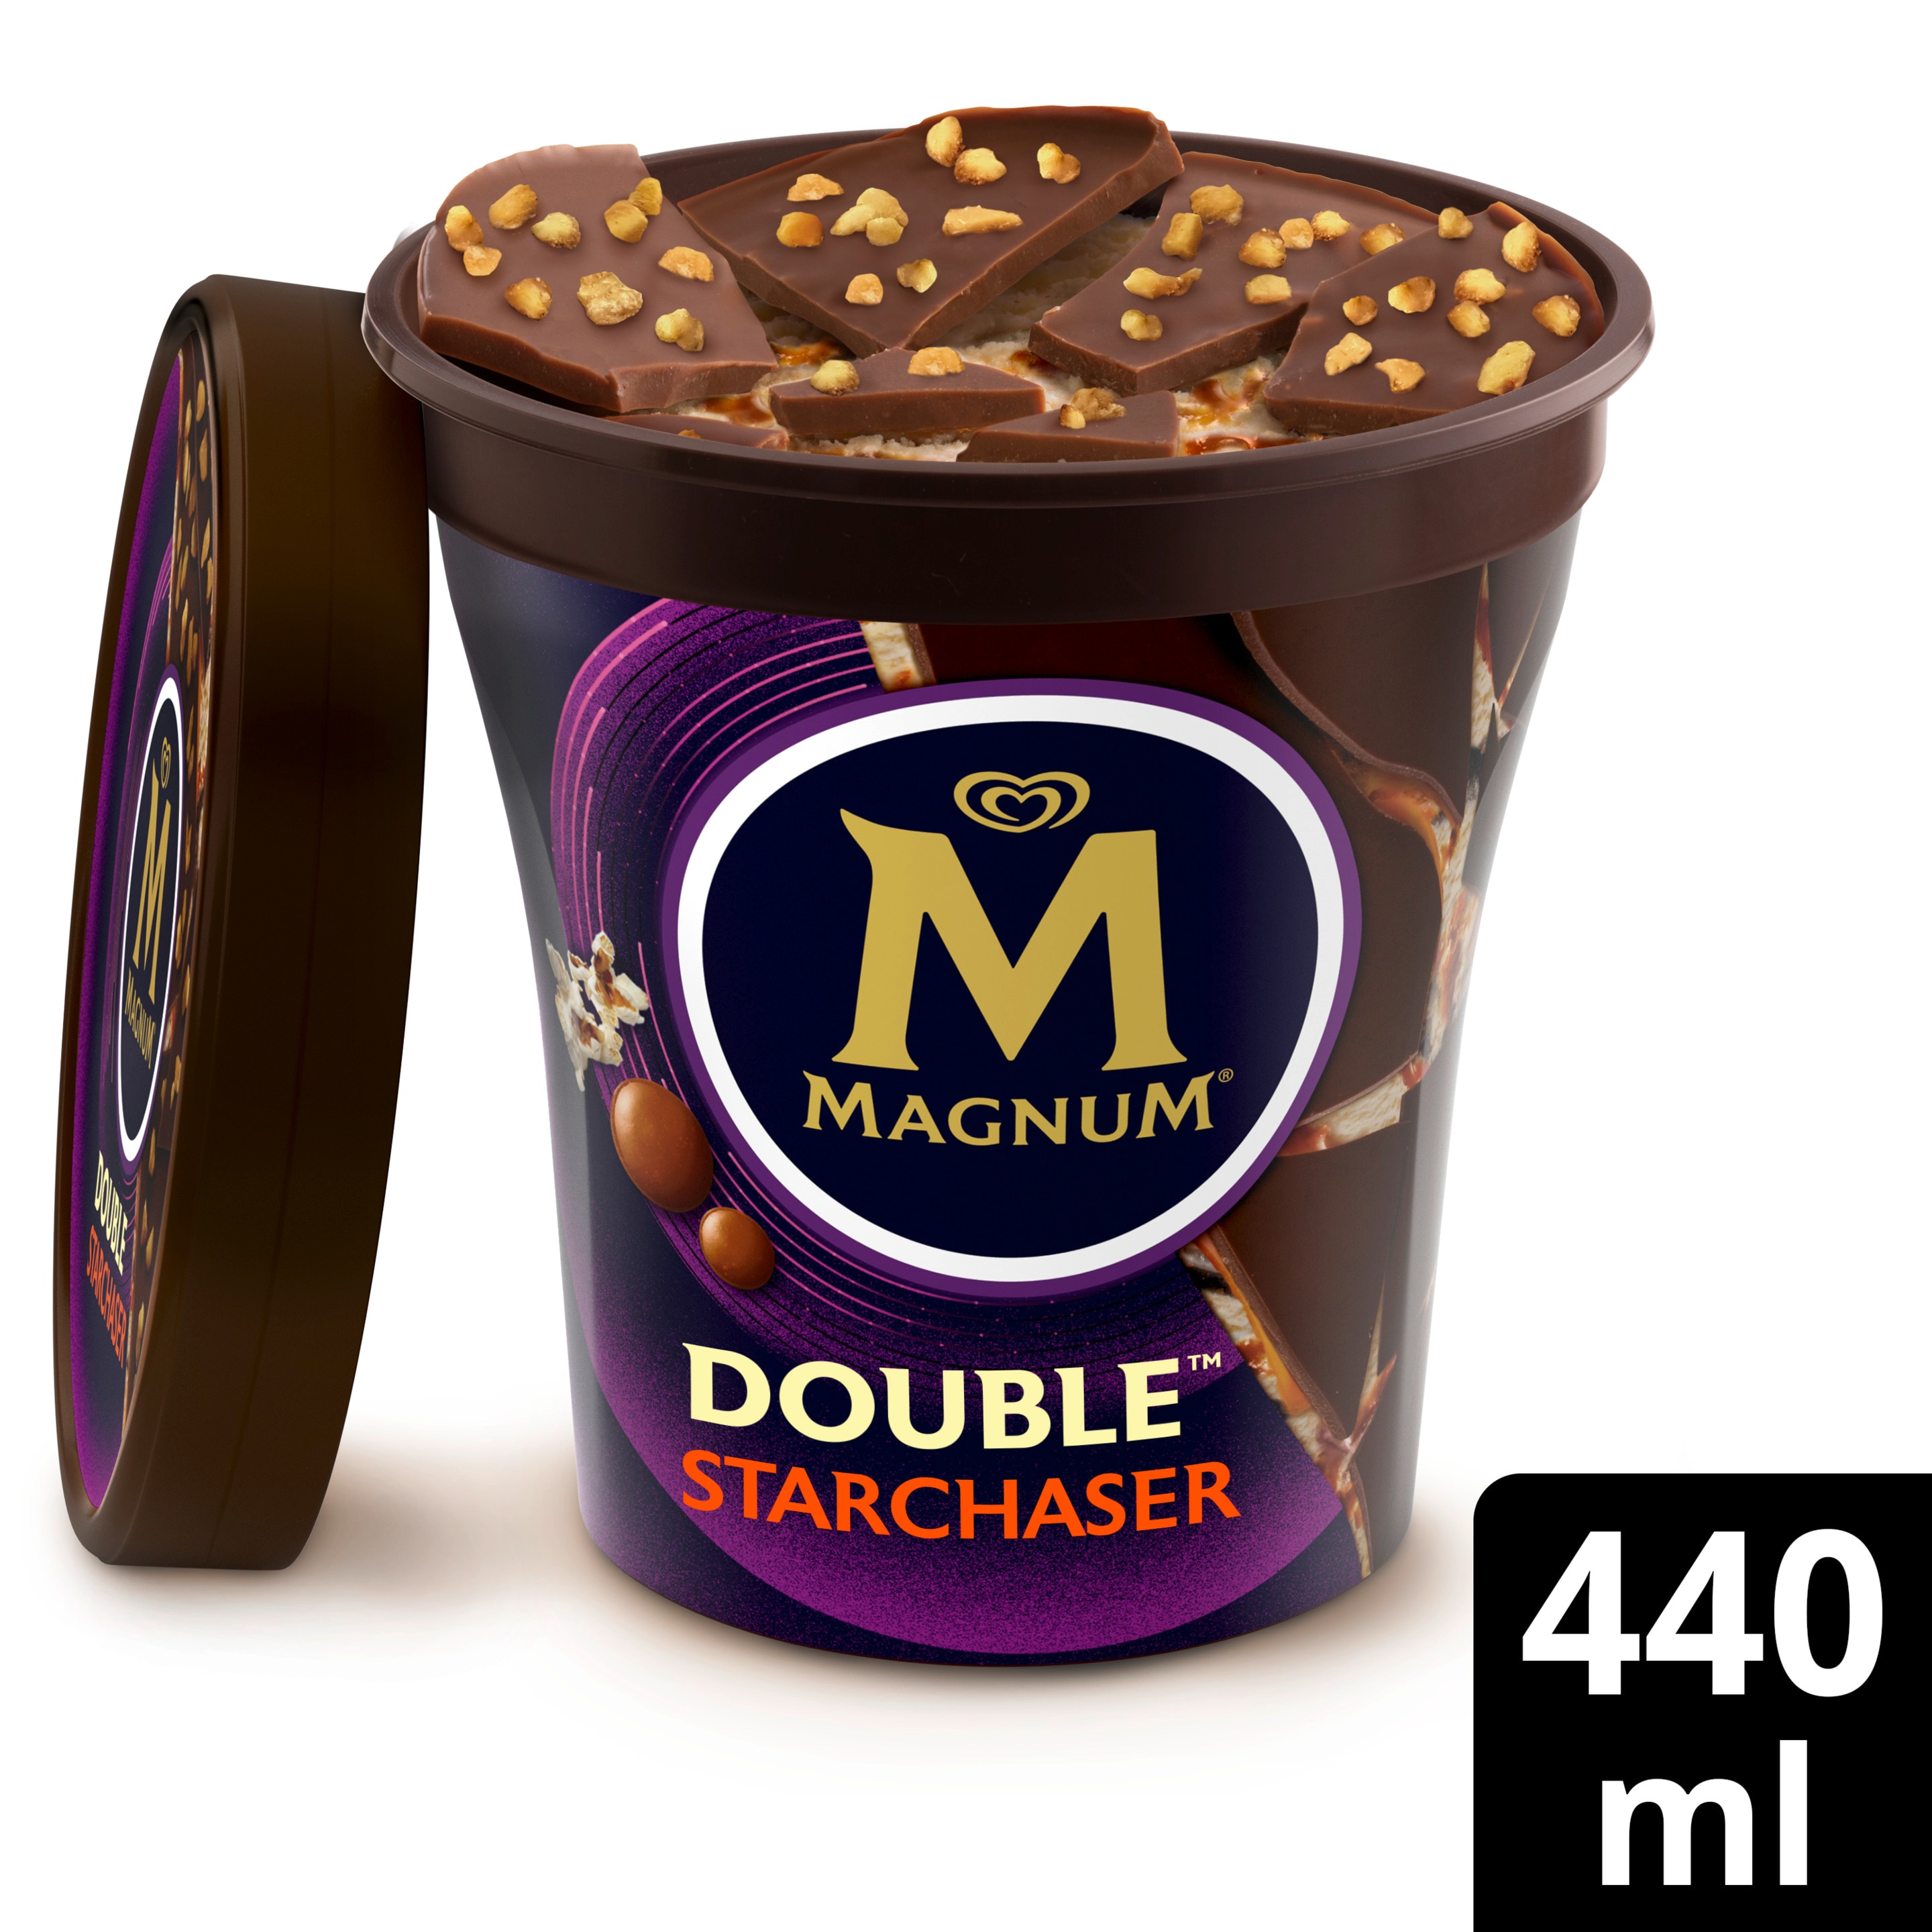 Magnum Double Starchaser Tub 440ml